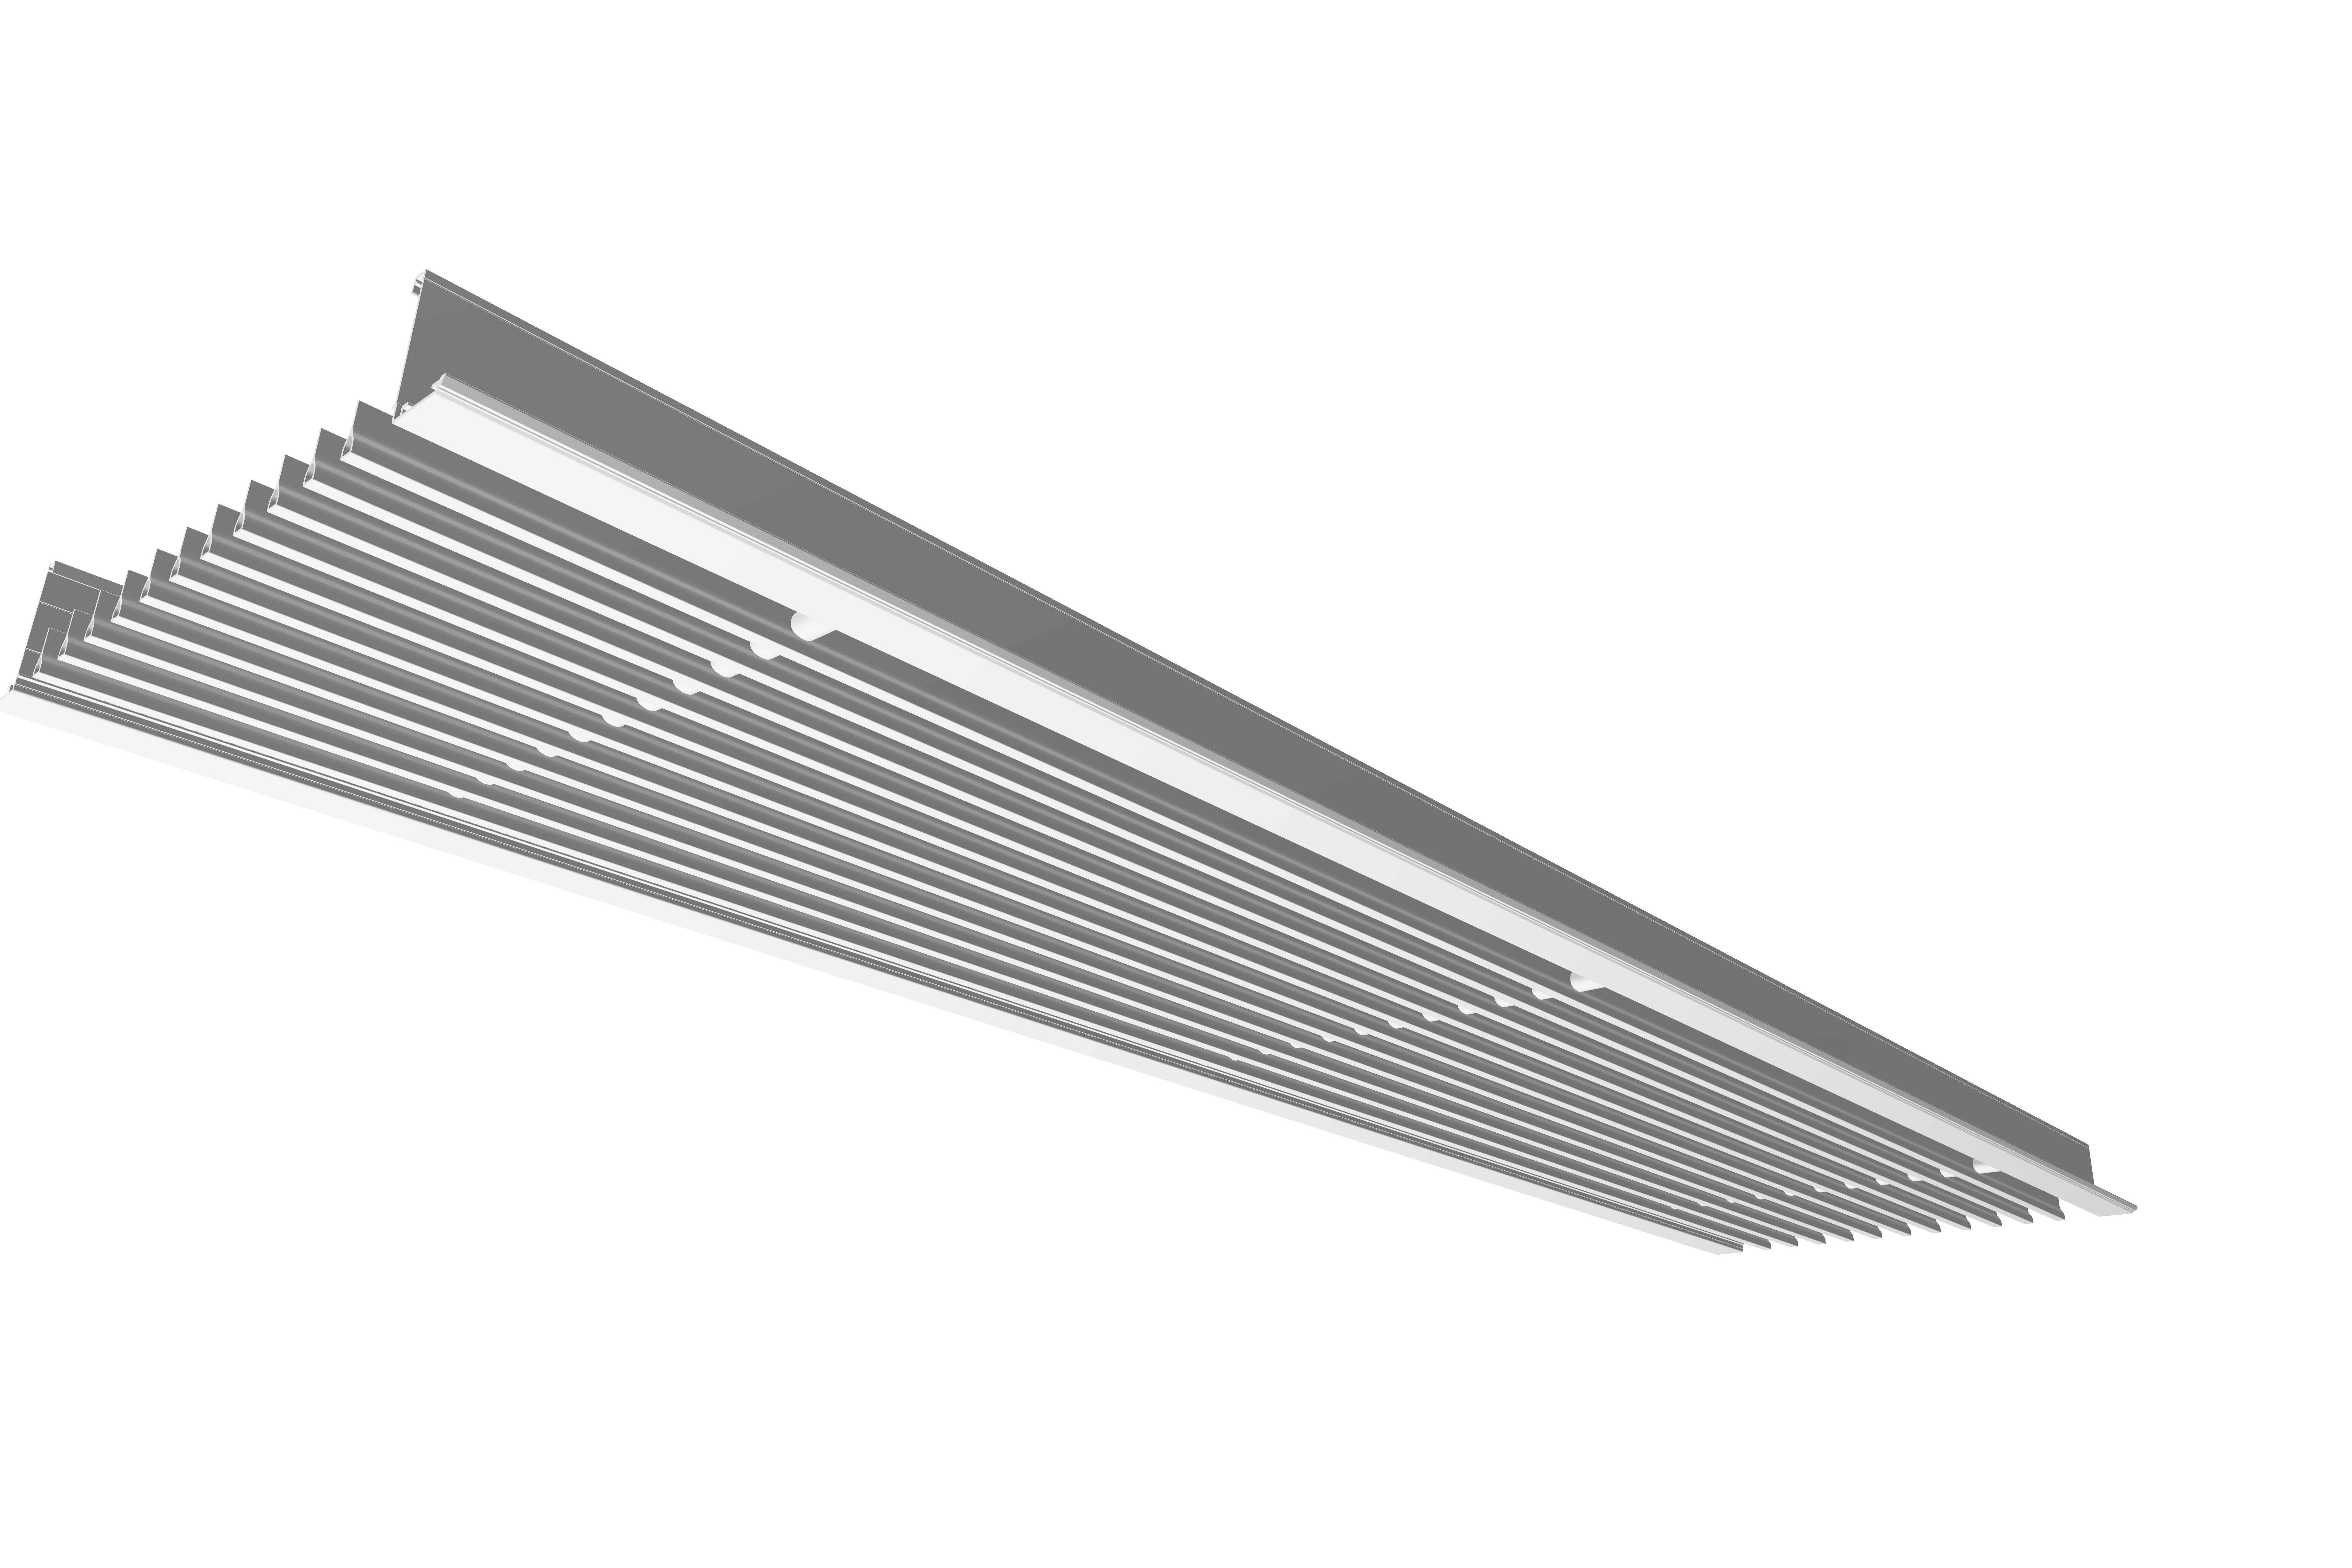 Starduct slot linear diffuser